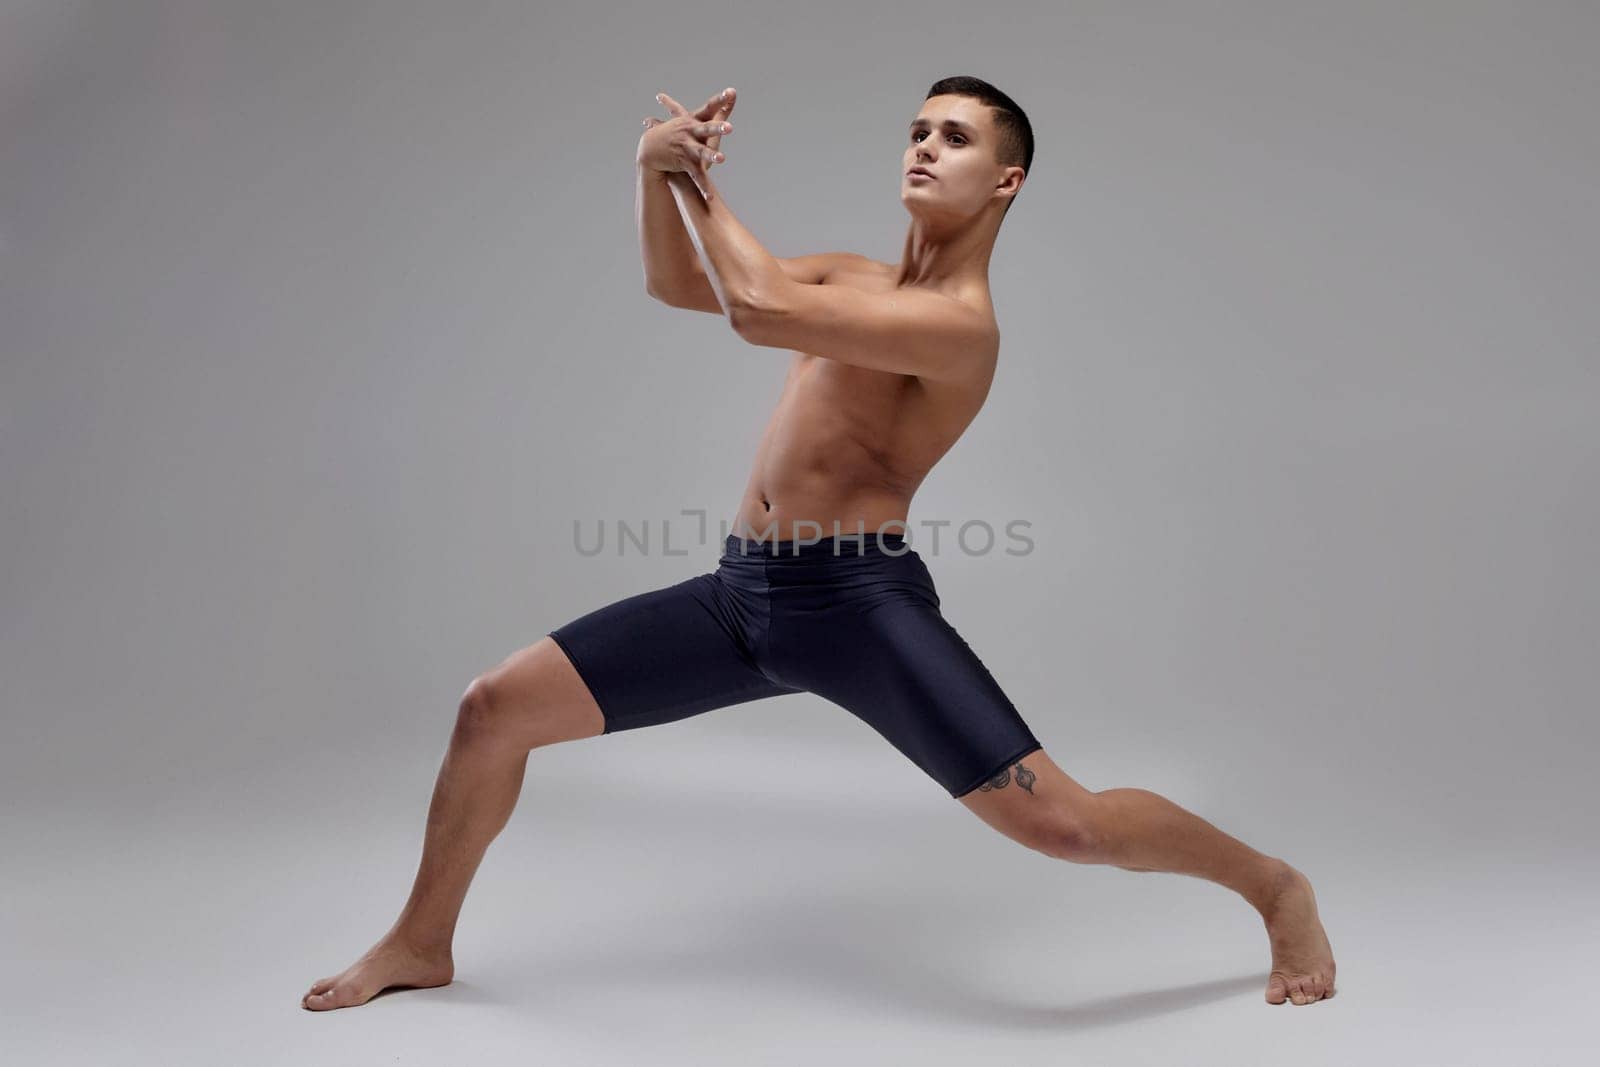 Full length portrait of an attractive handsome man ballet dancer, dressed in a black shorts. He is making a dance element with crossed hands, against a gray background in studio. Bare legs and torso. Ballet and contemporary choreography concept. Art photo.